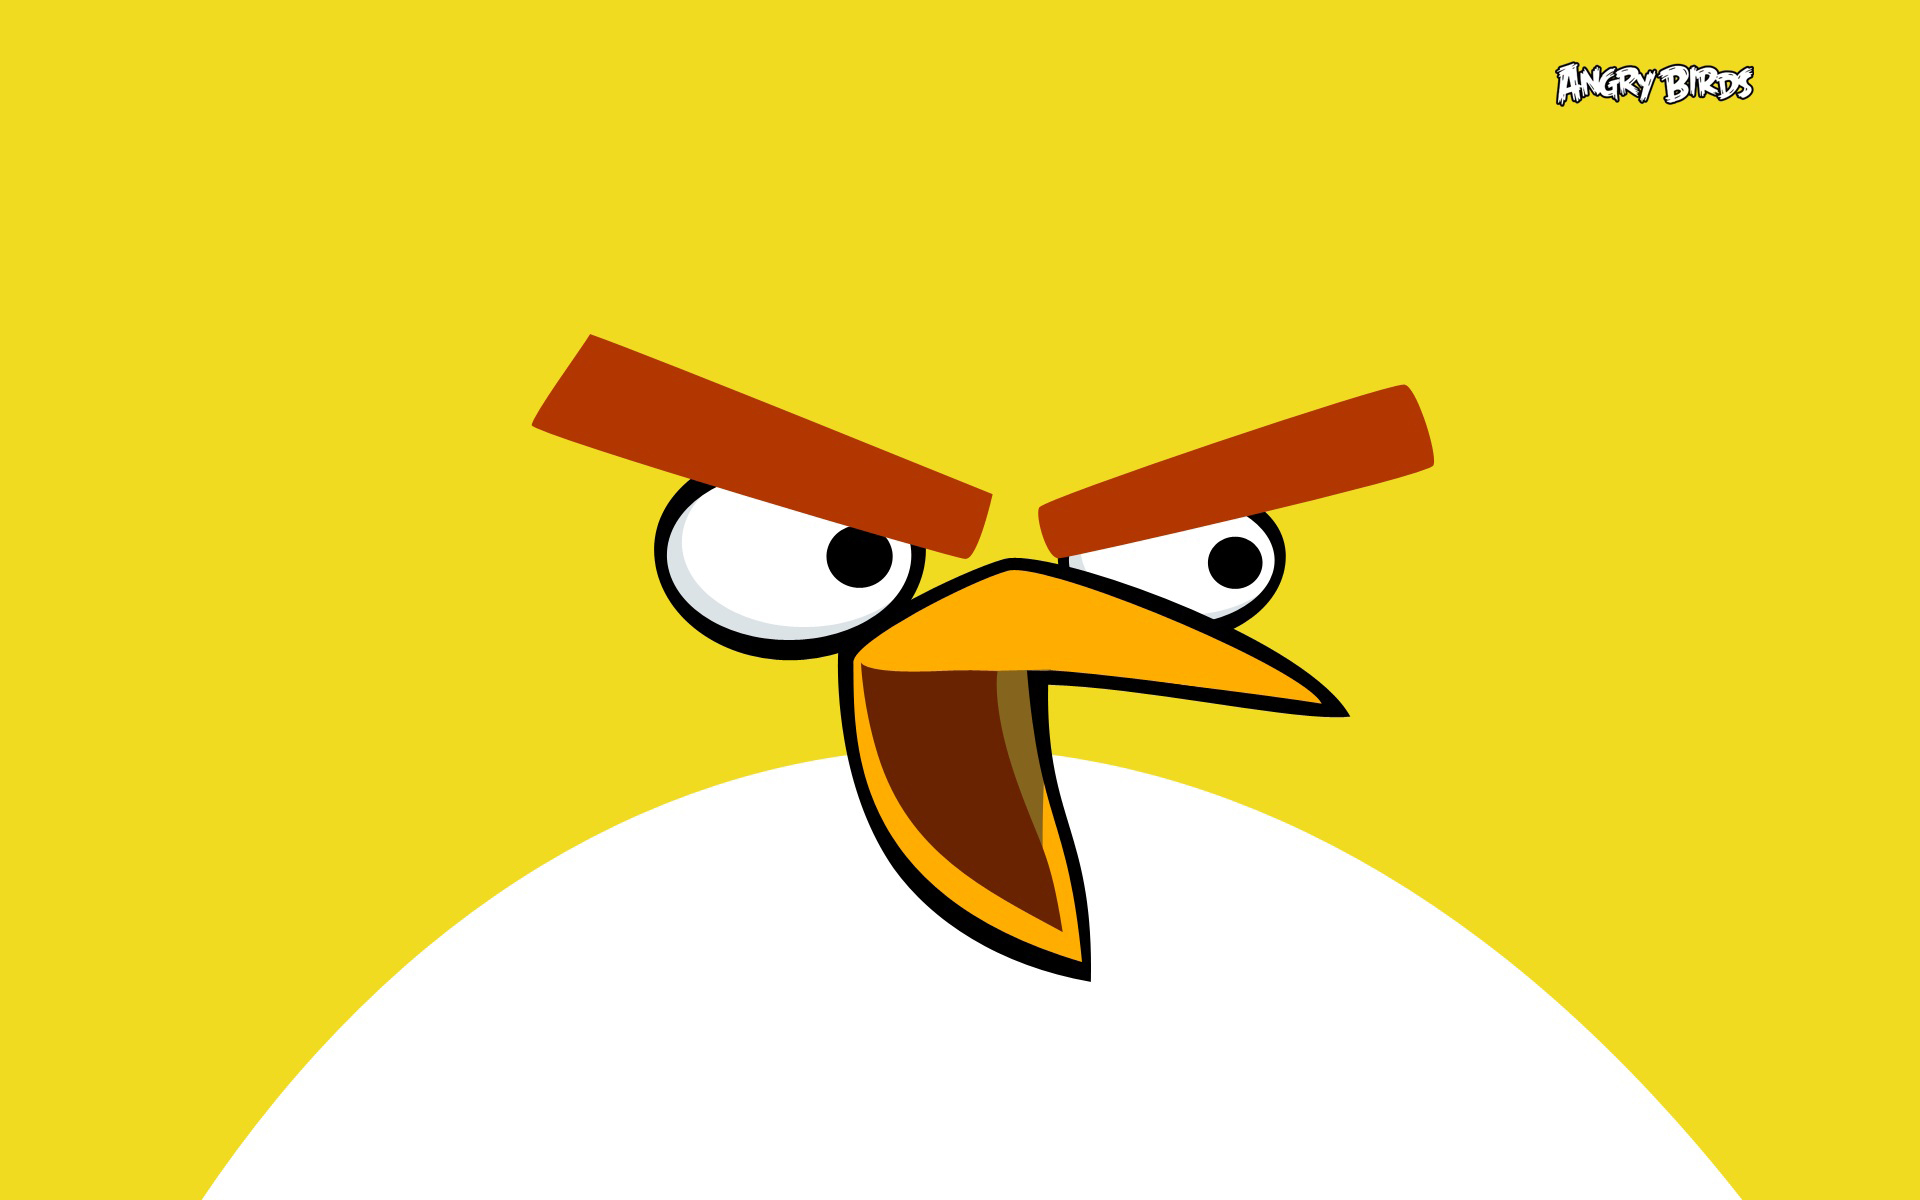 games, angry birds, yellow